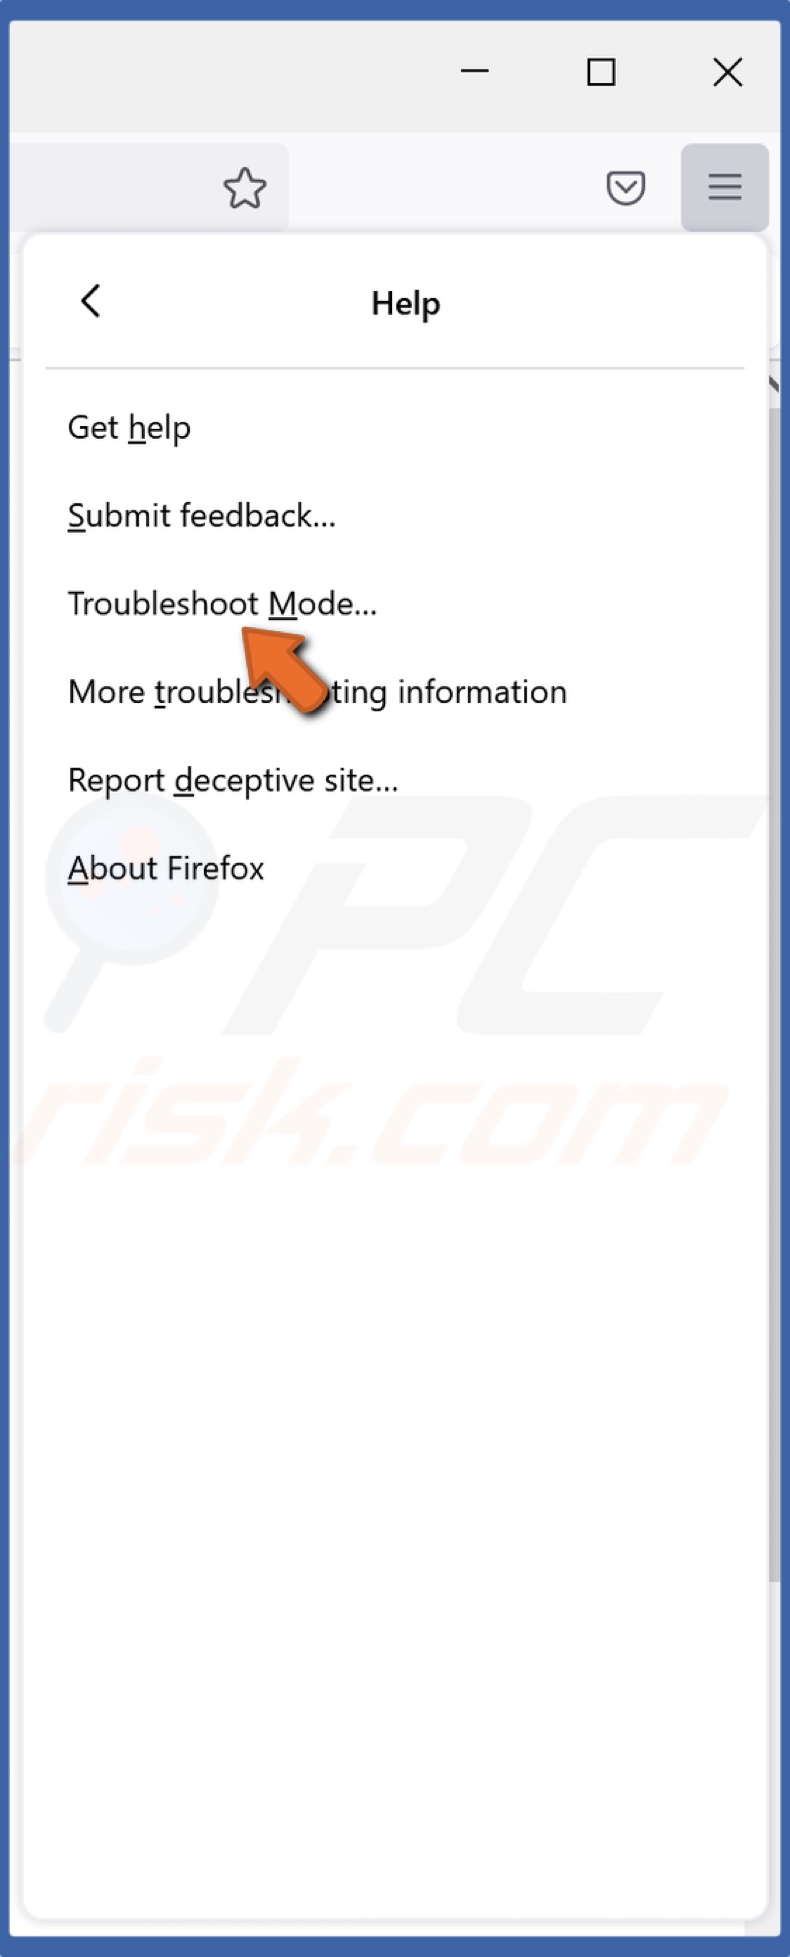 Click Troubleshoot Mode